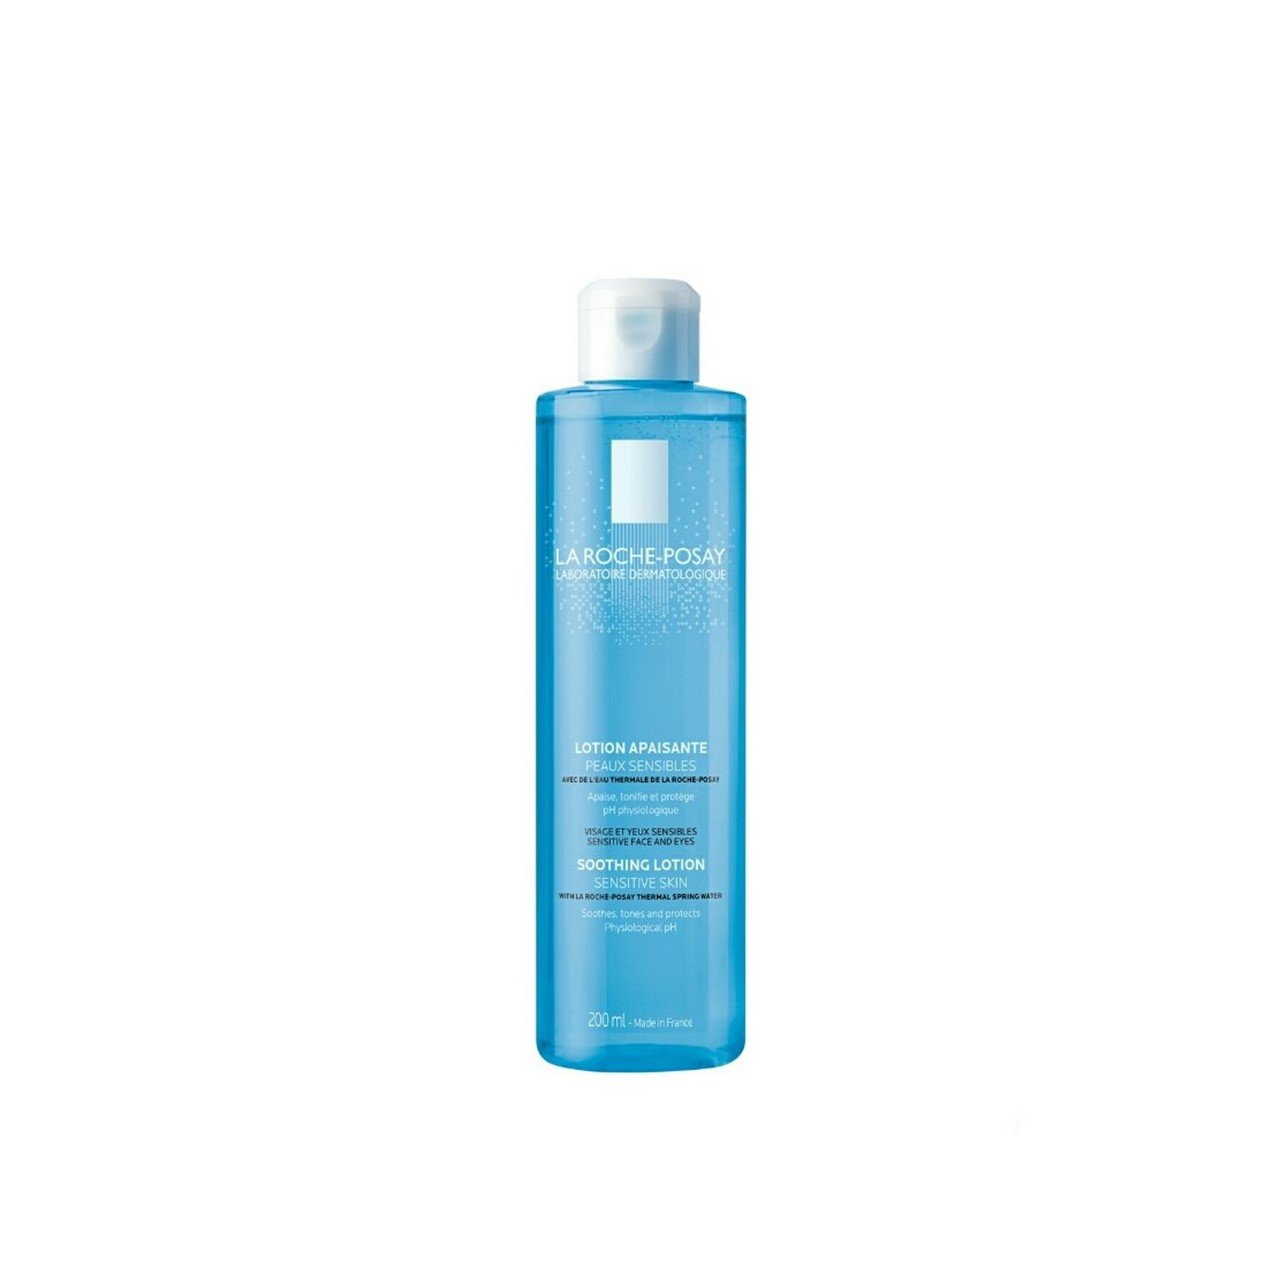 Roche-Posay Soothing Lotion Sensitive Skin 200ml (6.76fl · USA